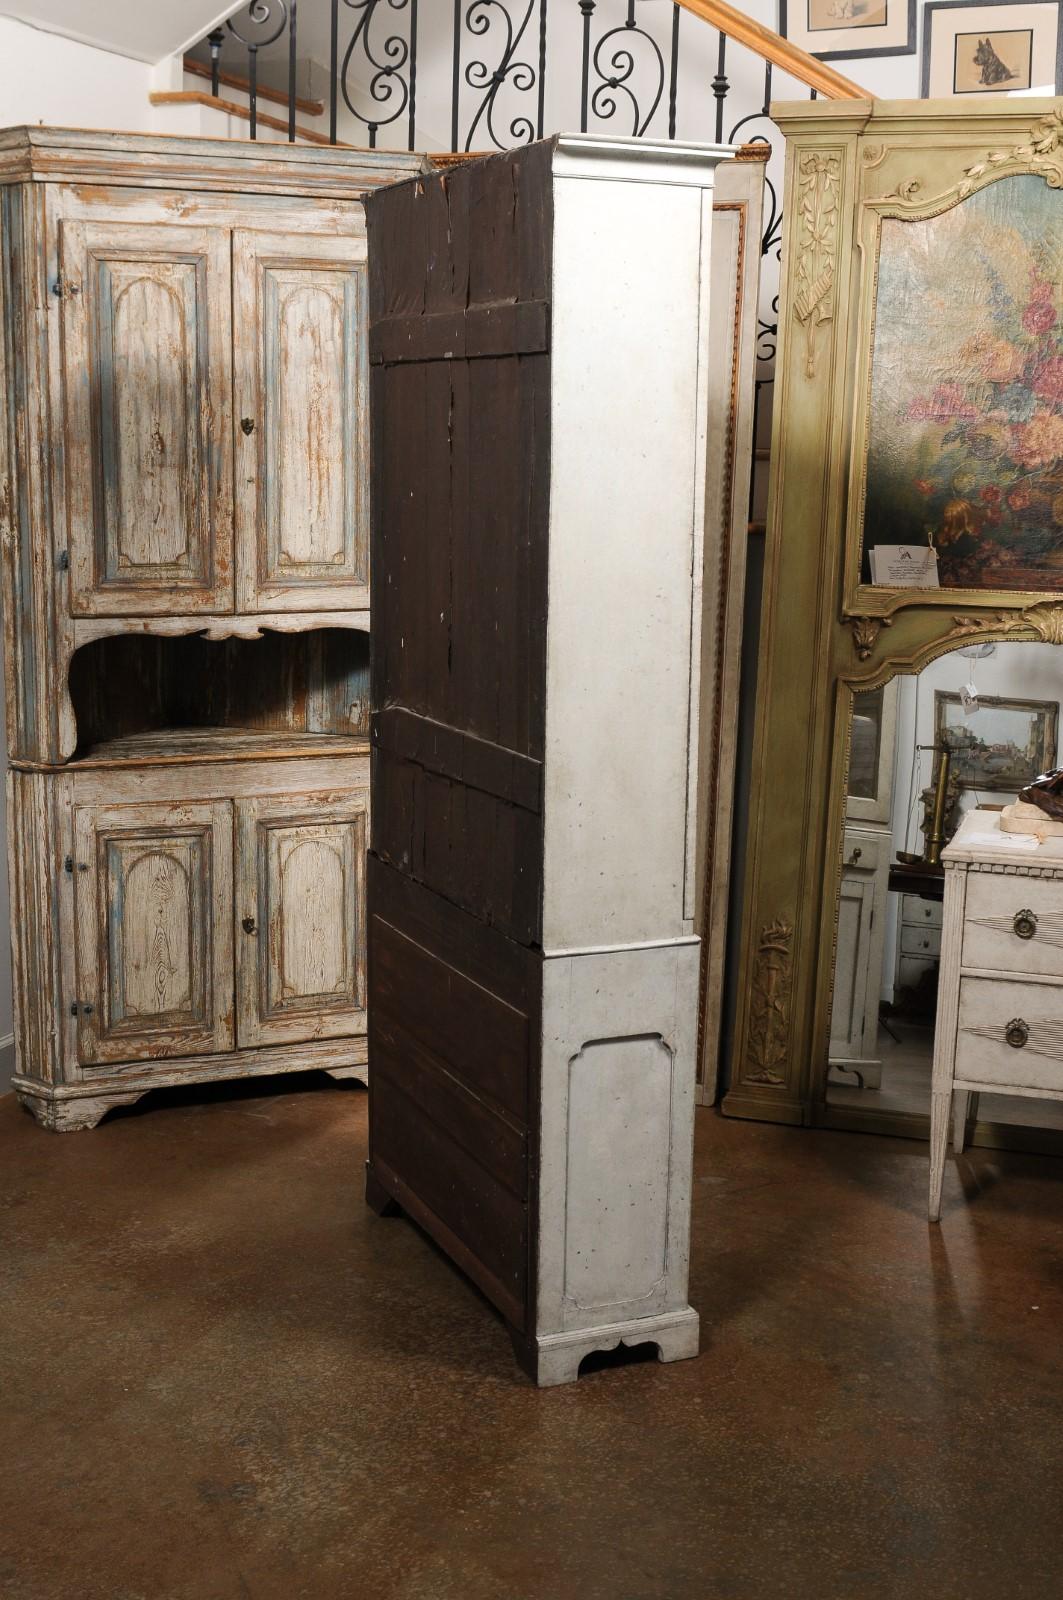 A Swedish Gustavian period painted wood two-part vitrine cabinet from the early 19th century, with single glass door, drawer and wooden doors. Created in Sweden during the first quarter of the 19th century, this painted cabinet features a cornice